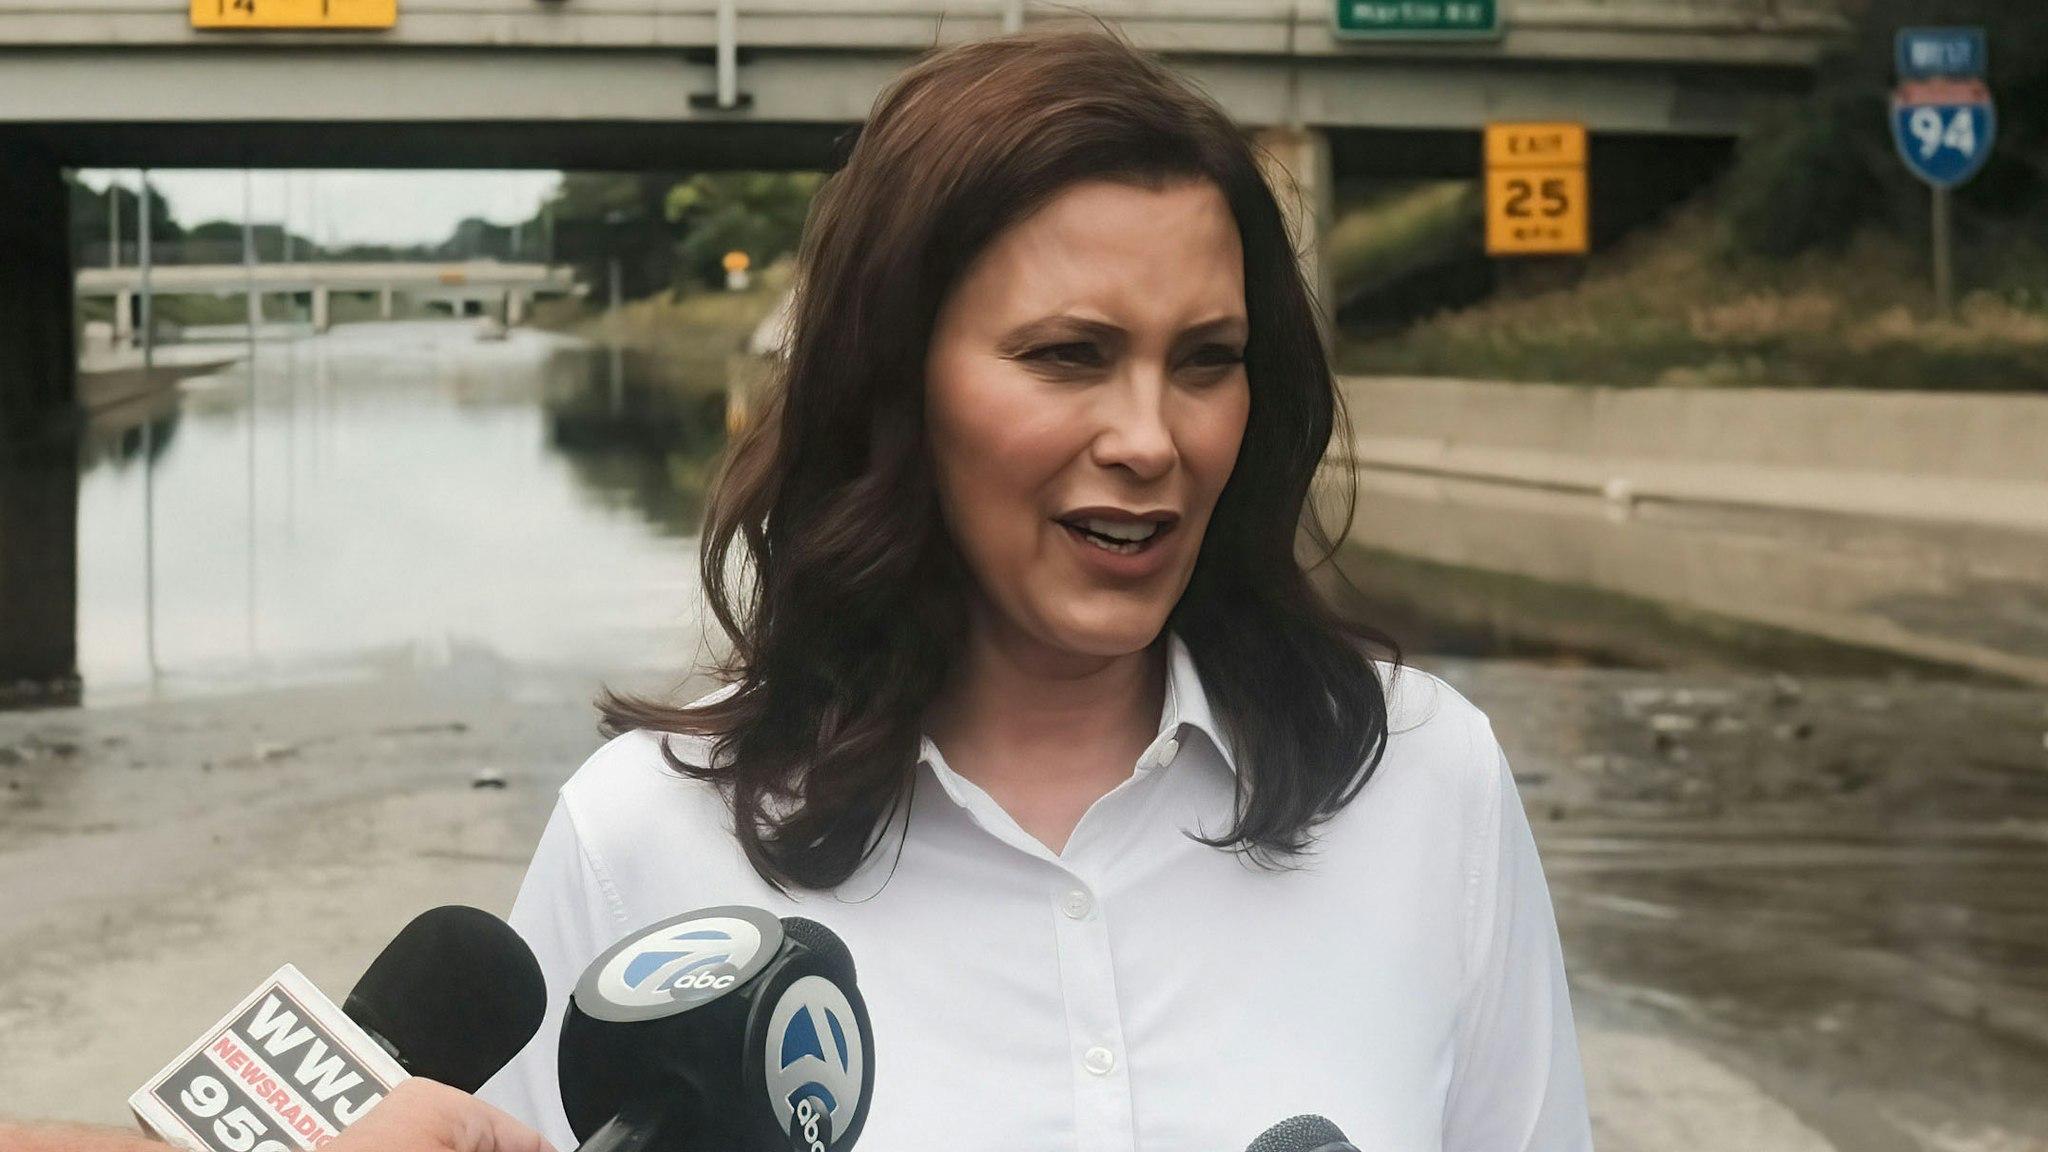 DETROIT, MICHIGAN, UNITED STATES - 2021/06/28: Michigan Governor Gretchen Whitmer speaks to members of the press during a press conference held on the still inundated I-94 in Detroit. After a weekend of heavy storms beginning on Friday night and lasting through the weekend rainwater flooded parts of I-94 in Detroit, Michigan forcing some motorists to abandon their vehicles and seek shelter from the heavy rains. Flood waters remained in areas along I-94 between Dearborn and Downtown Detroit several days later as Michigan Governor Gretchen Whitmer held a press conference on the still inundated I-94.